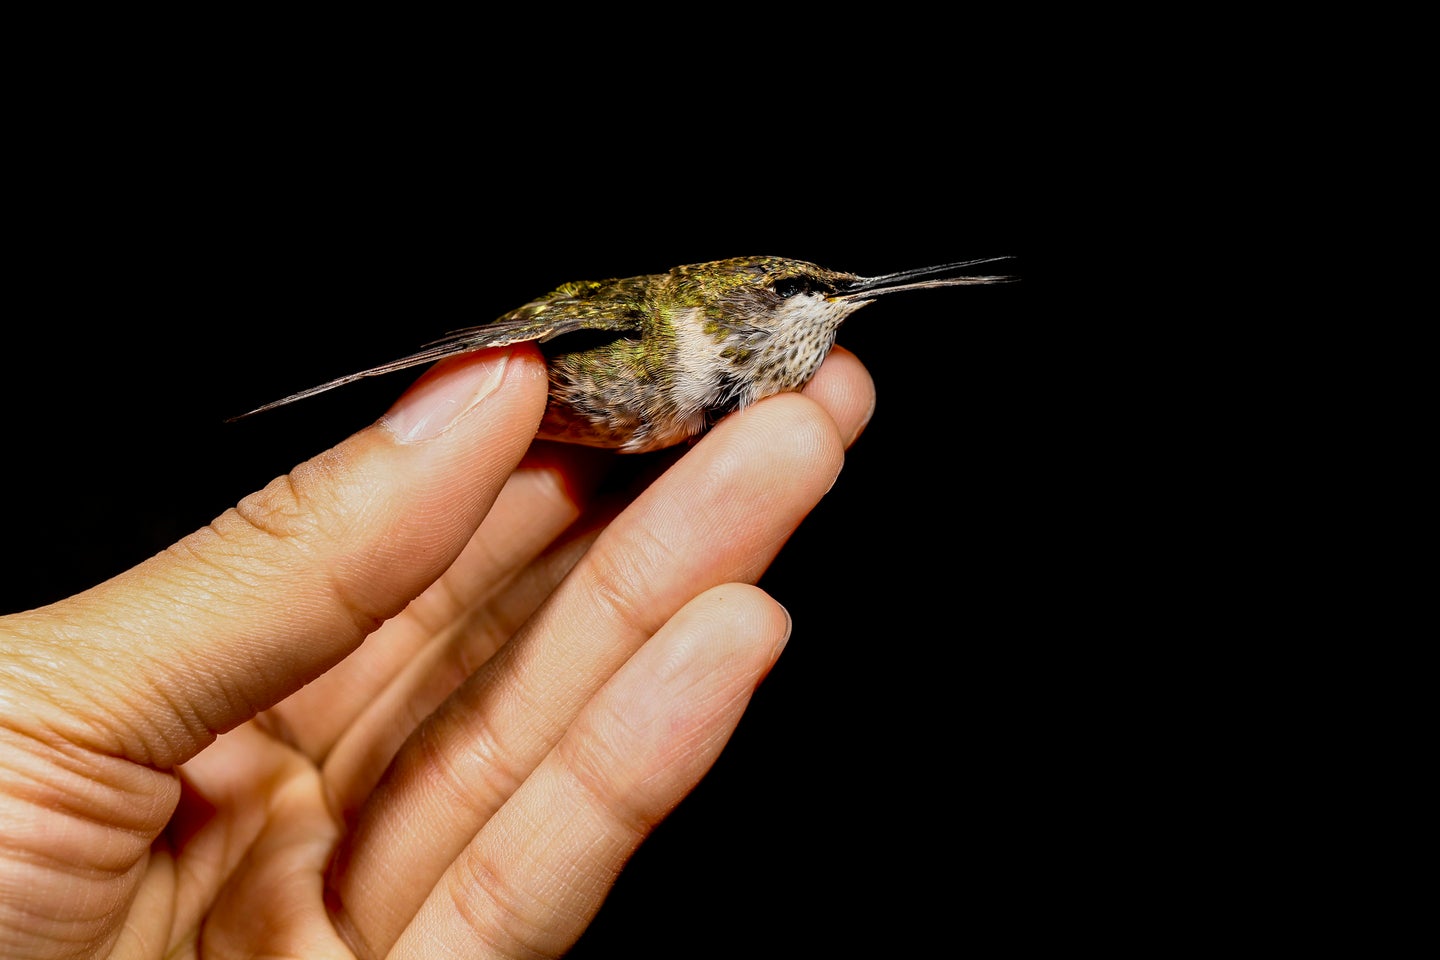 How to help an injured bird | Popular Science